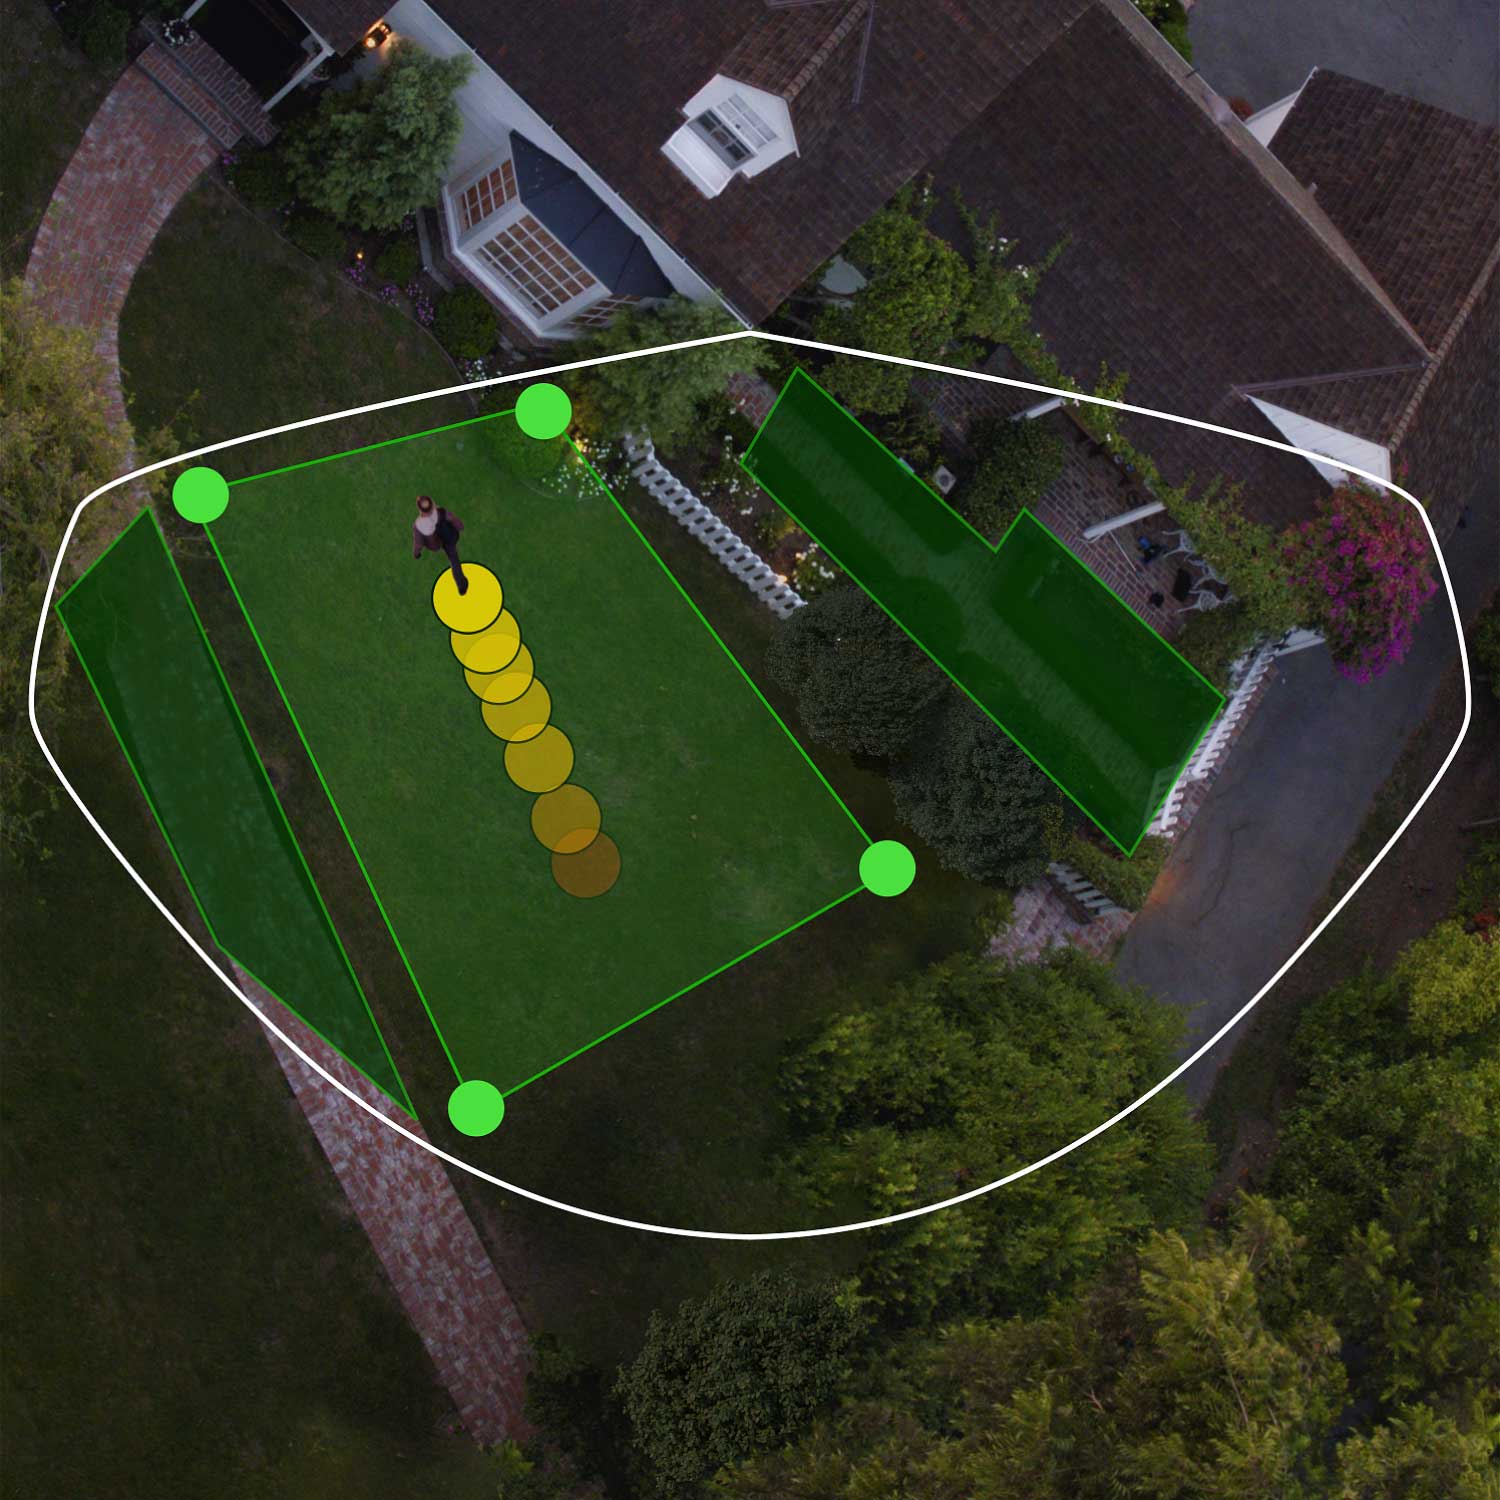 Floodlight Cam Wired Pro - Aerial view of front of house showing bird's eye view zones in green. Person walks toward front door, their path indicated by yellow dots.